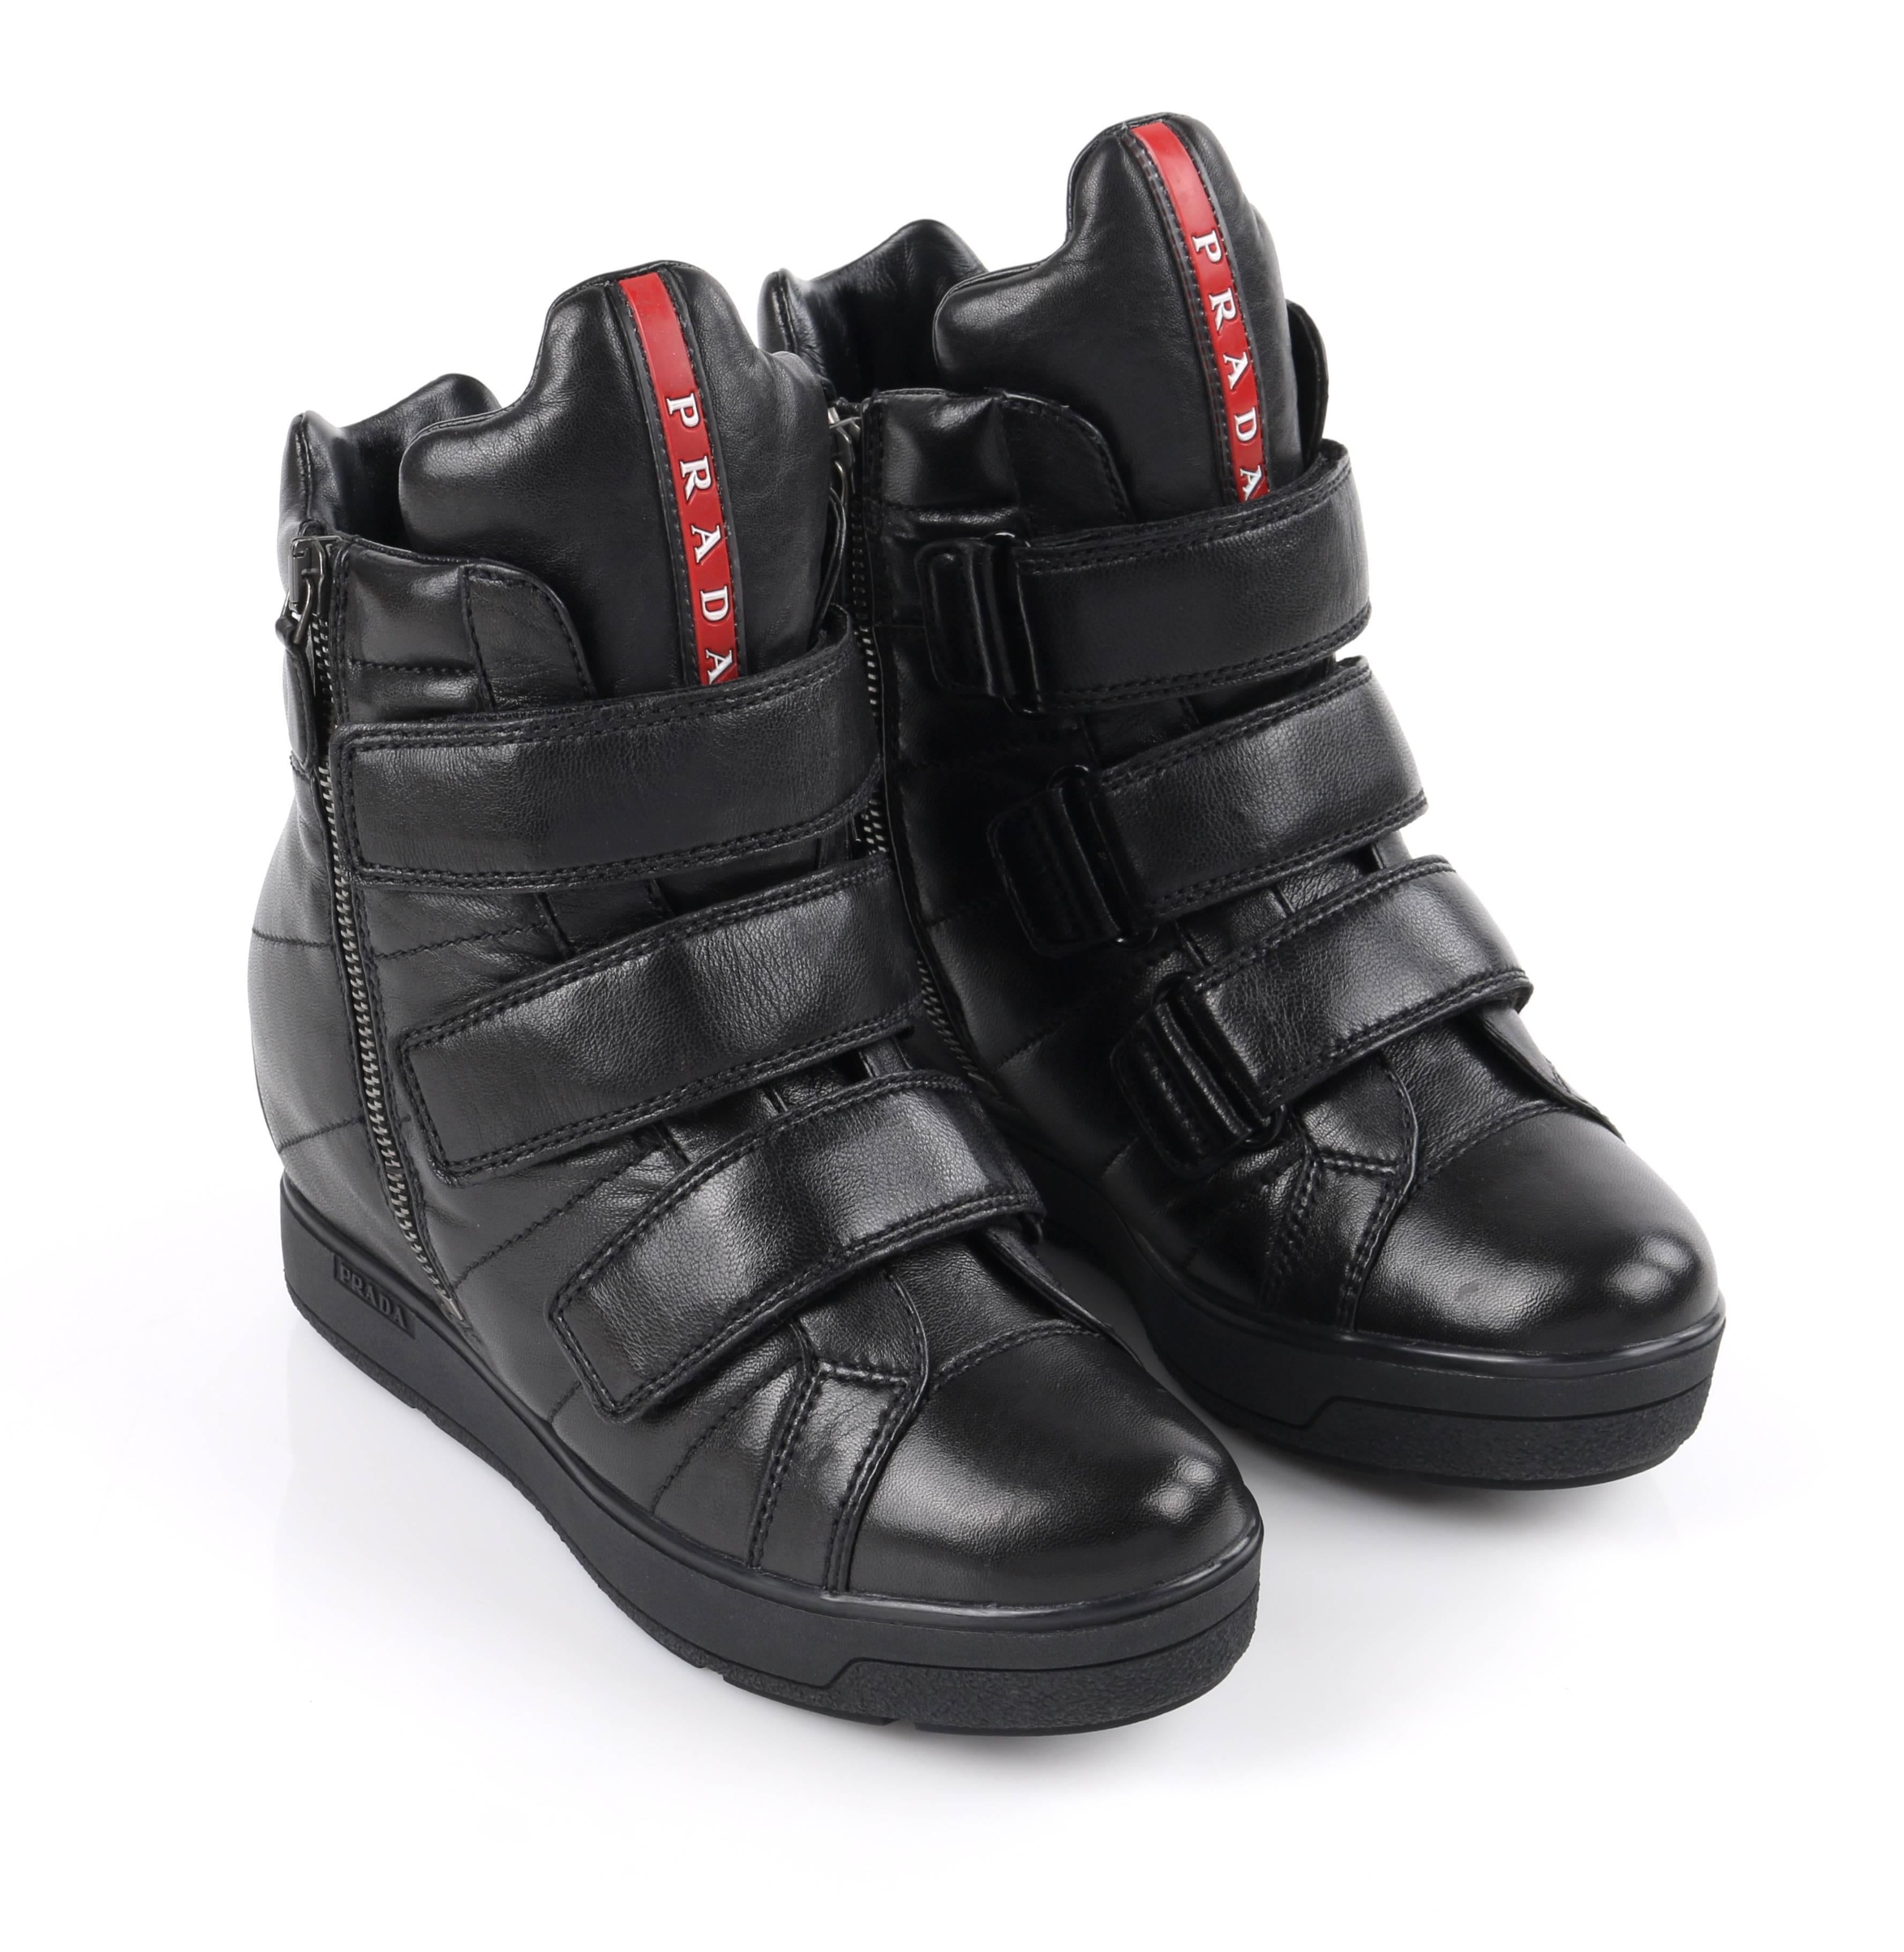 Prada Sport Autumn / Winter 2013 black vitello leather triple strap hi top wedge sneakers. Designed by Miuccia Prada. Black smooth vitello leather upper. Three adjustable hook and loop straps across front. Two gun-metal toned side seam zippers with